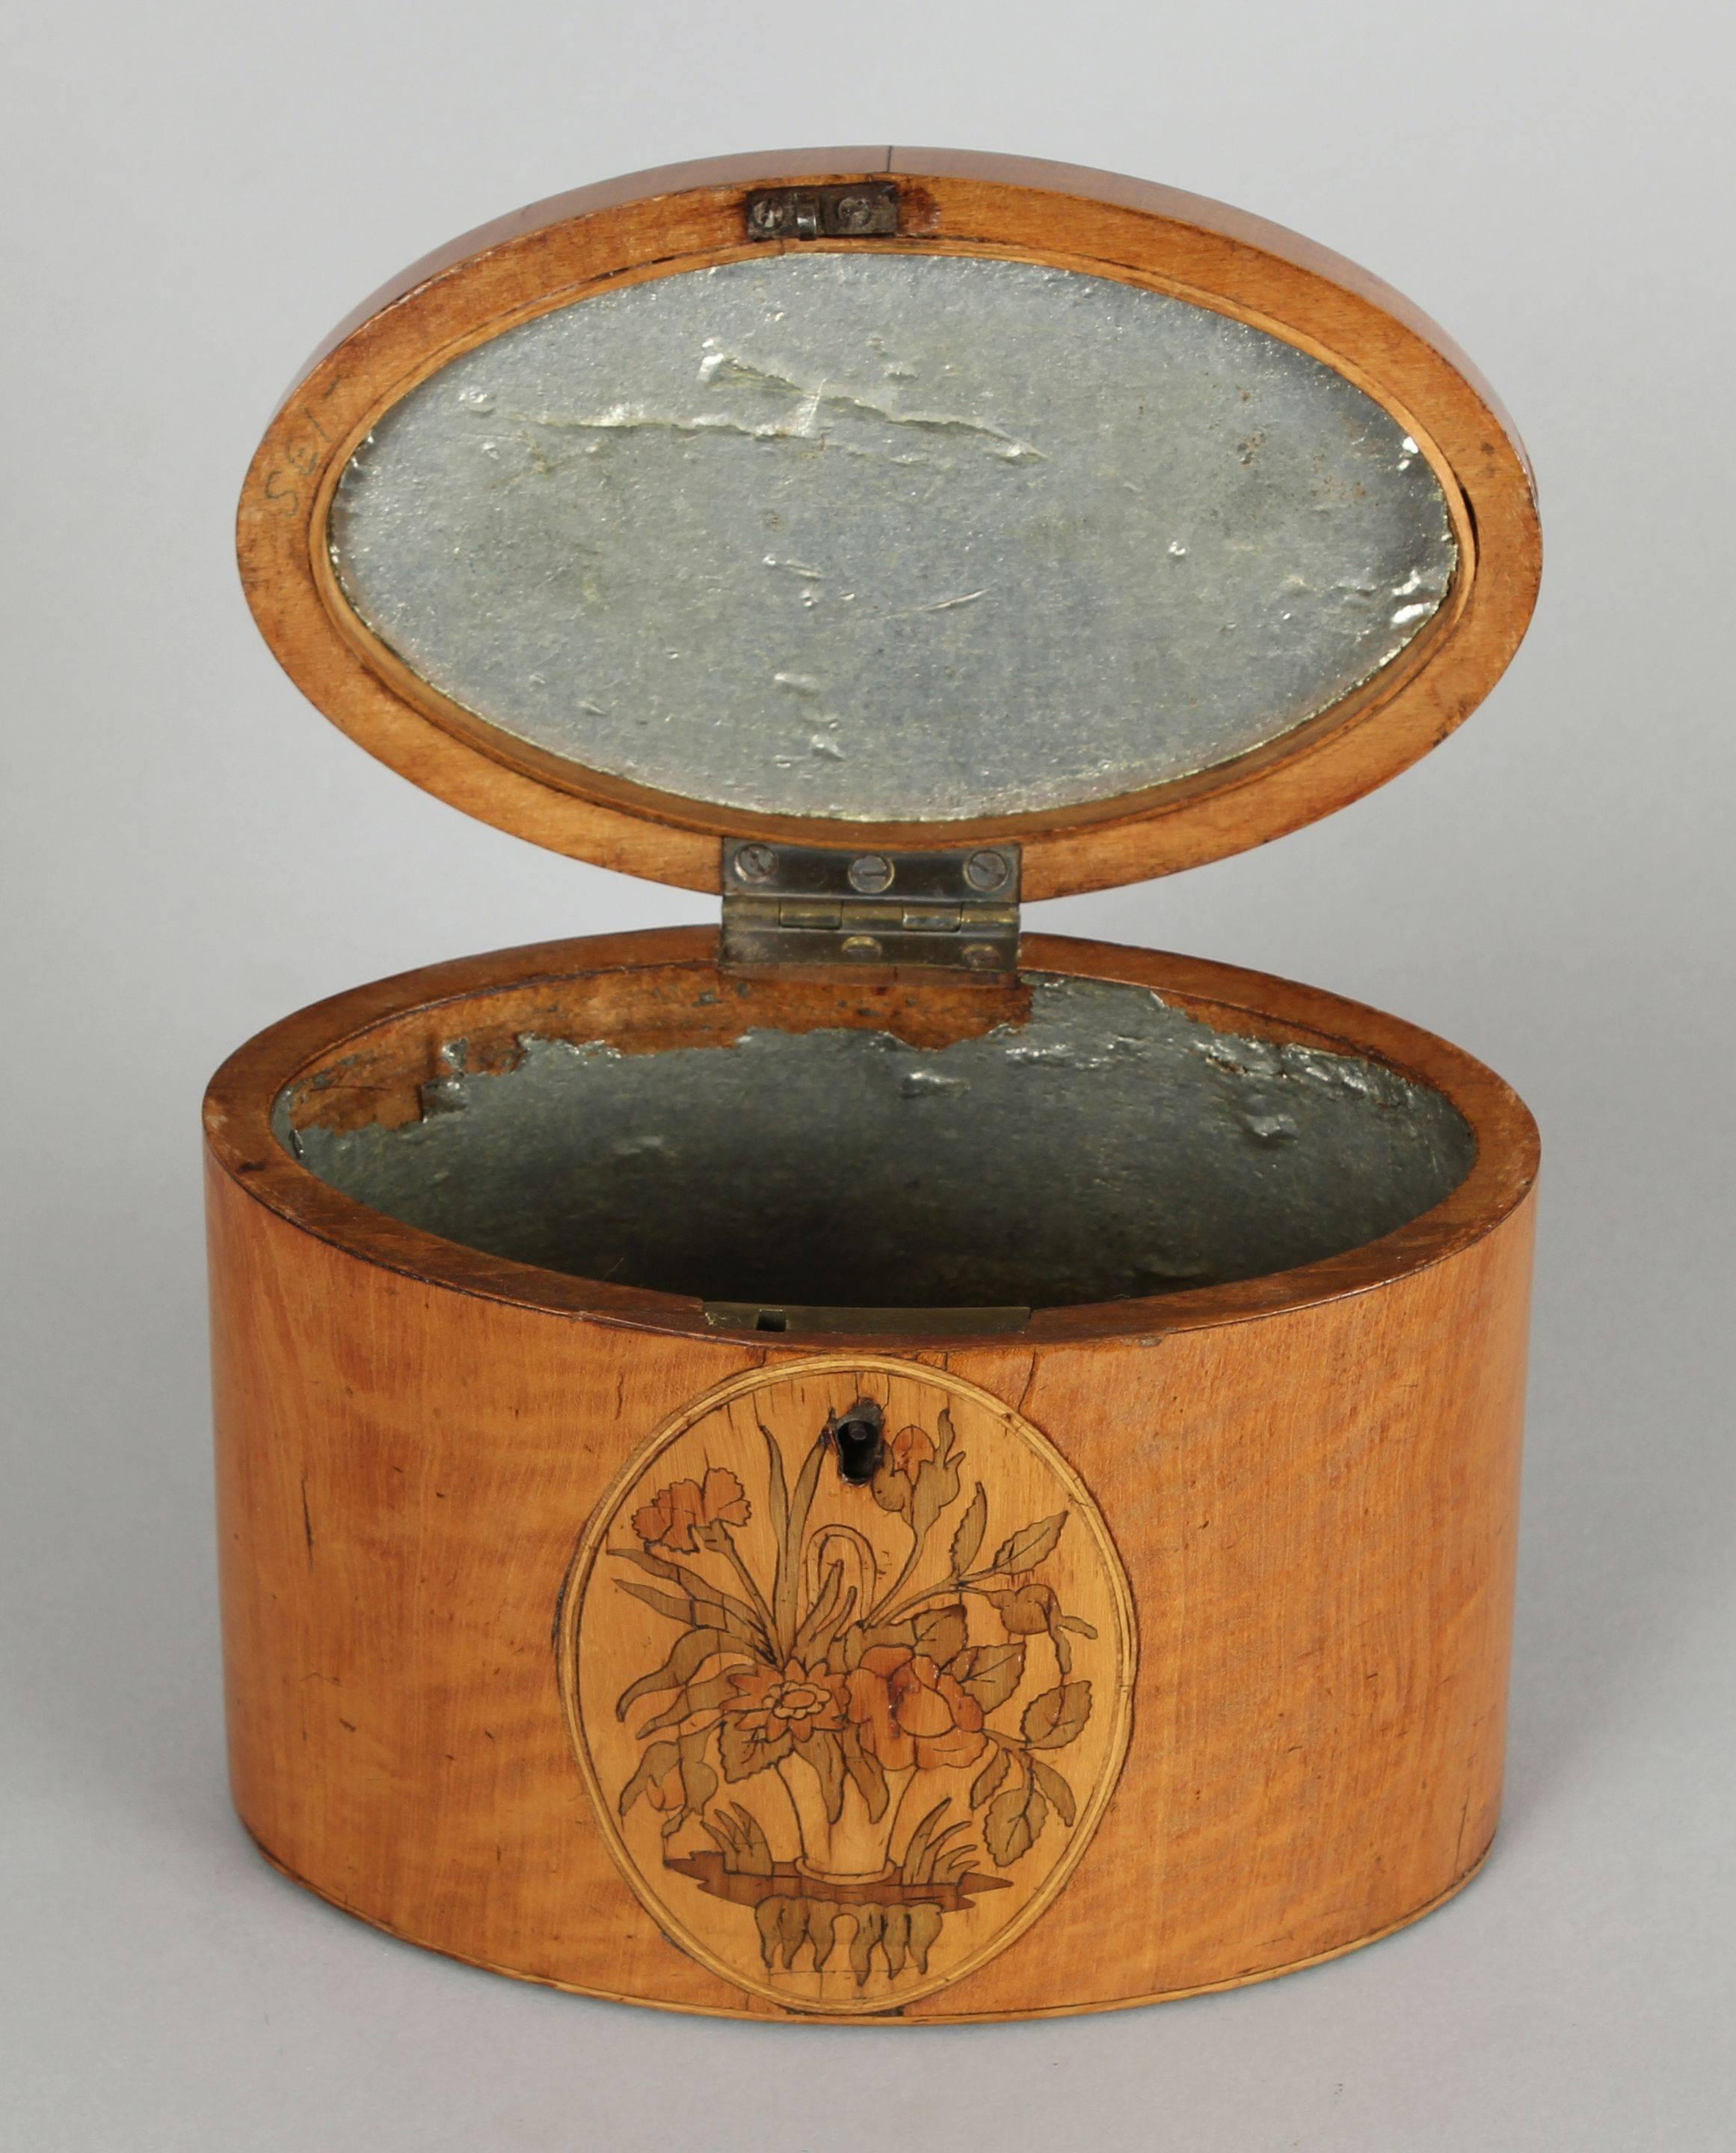 George III period satinwood oval tea-caddy with inlaid panels of flowers and a stylised shell.